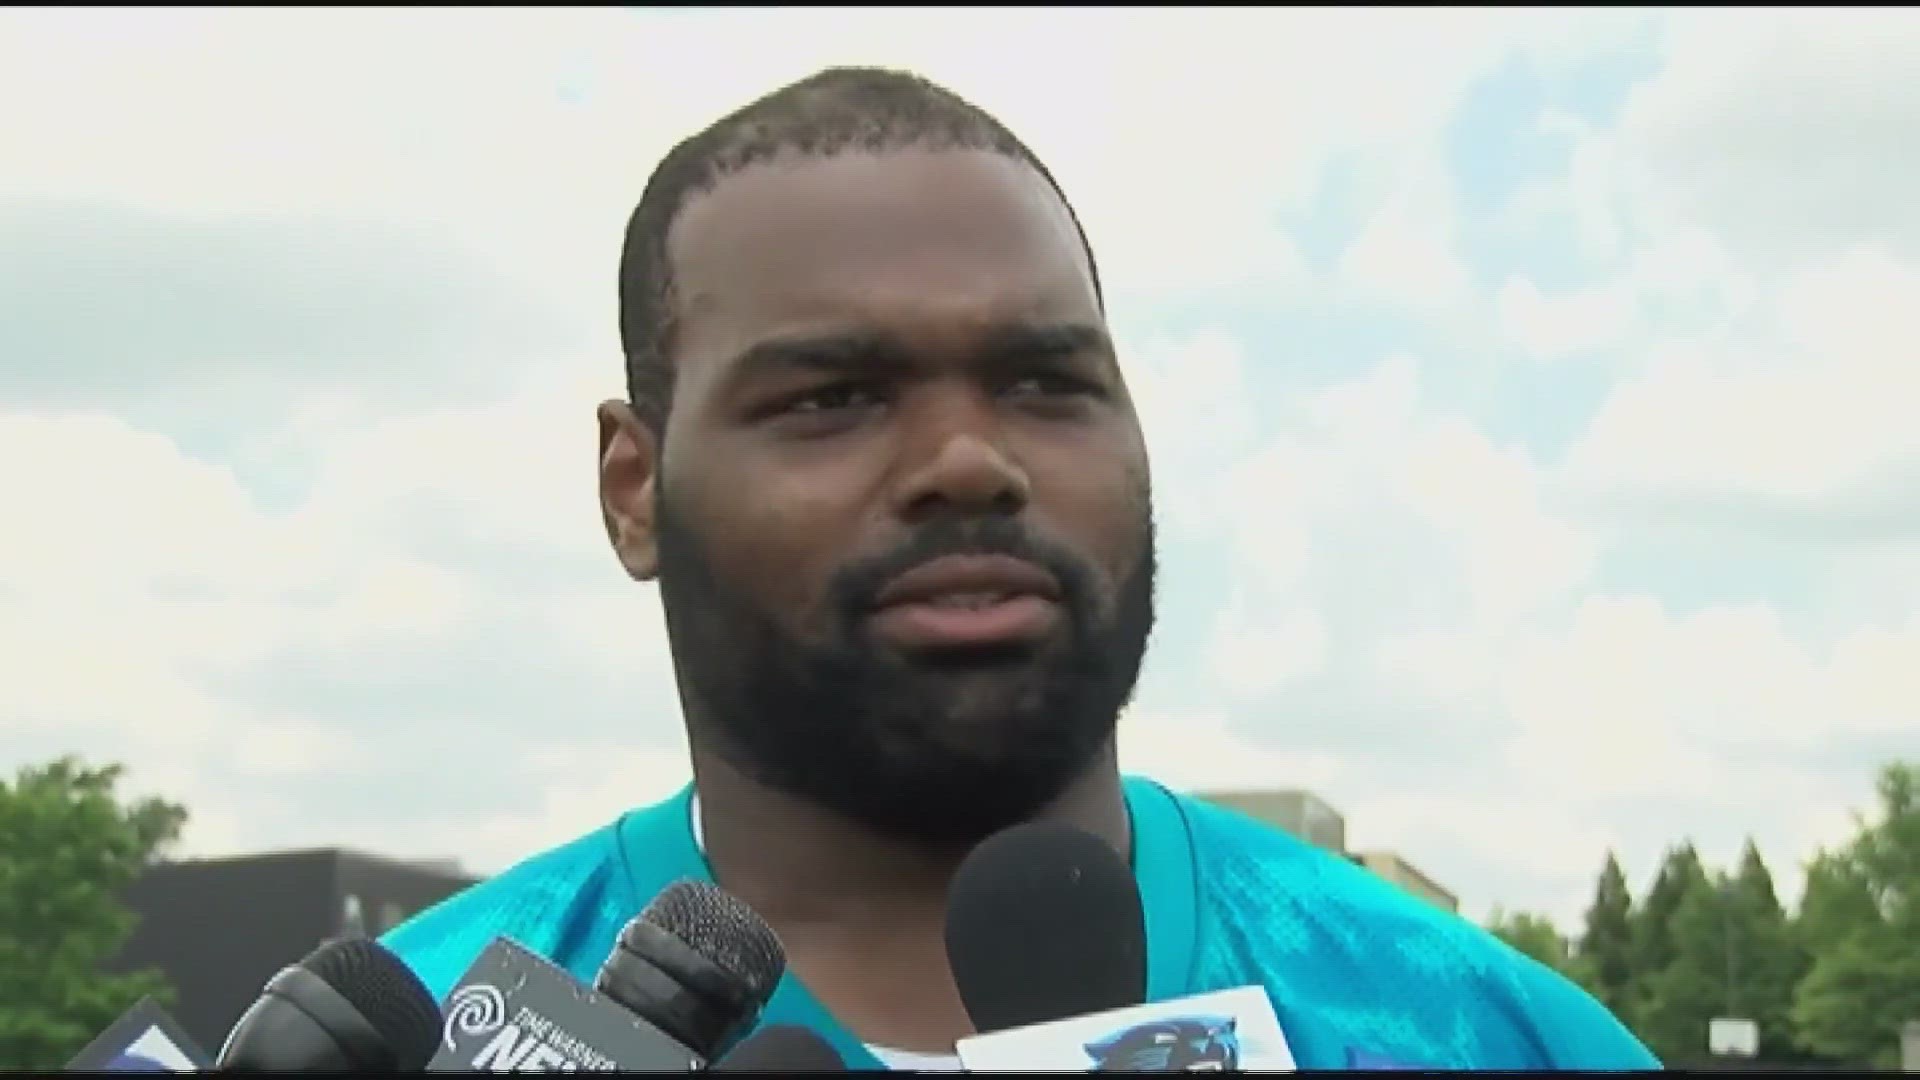 The Blind Side' subject Michael Oher says his adoption was a 'lie